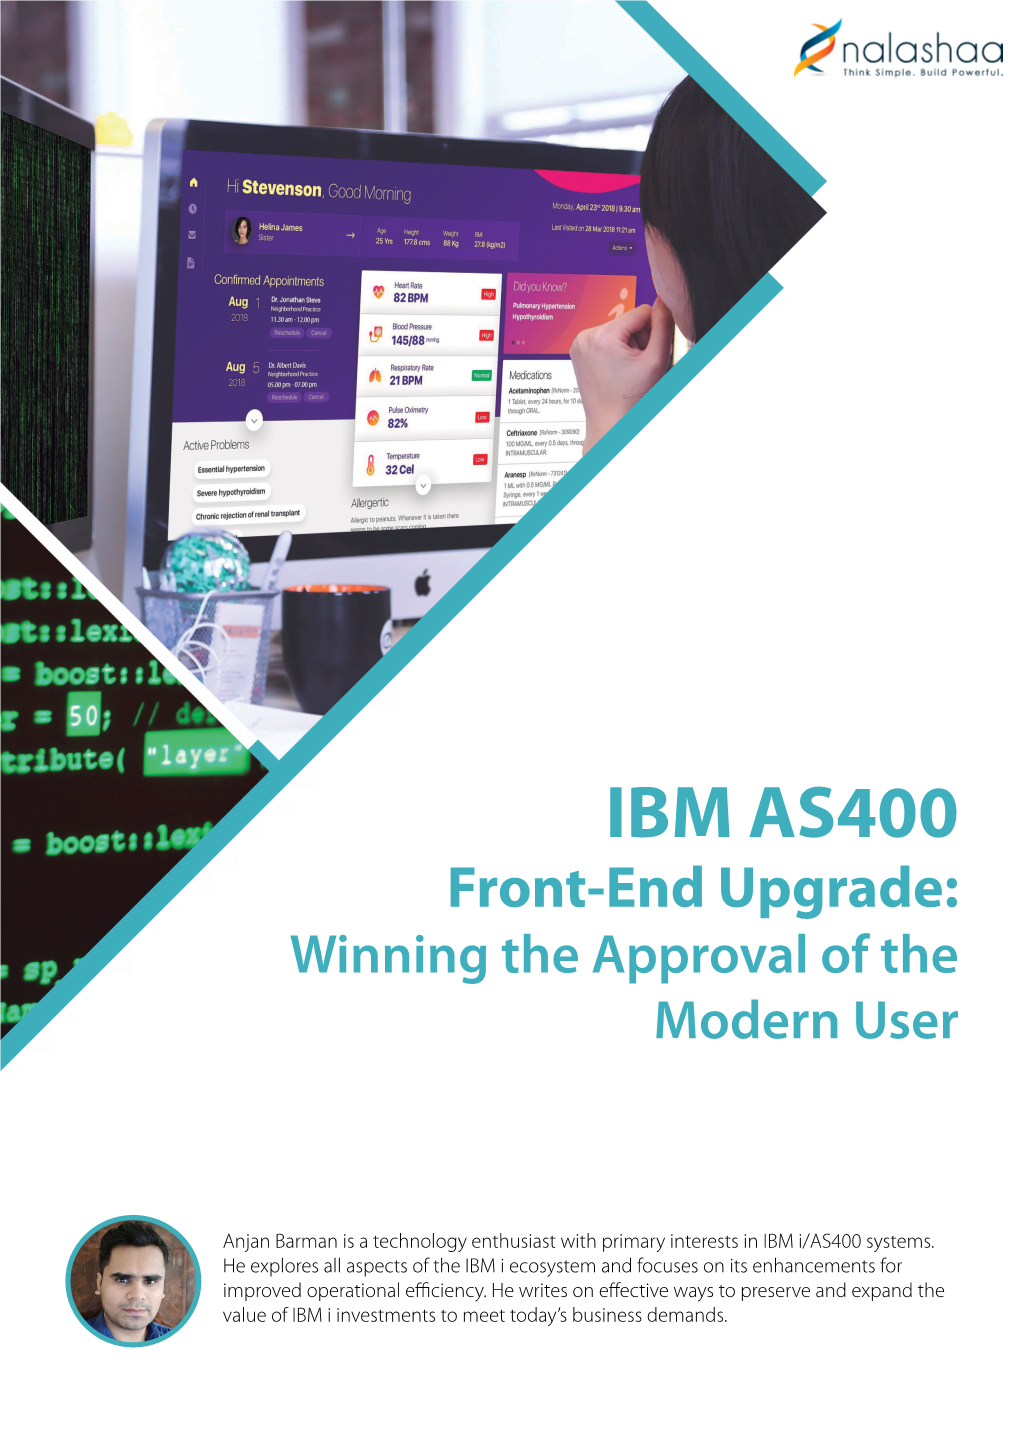 IBM AS400 Front-End Upgrade: Winning the Approval of the Modern User